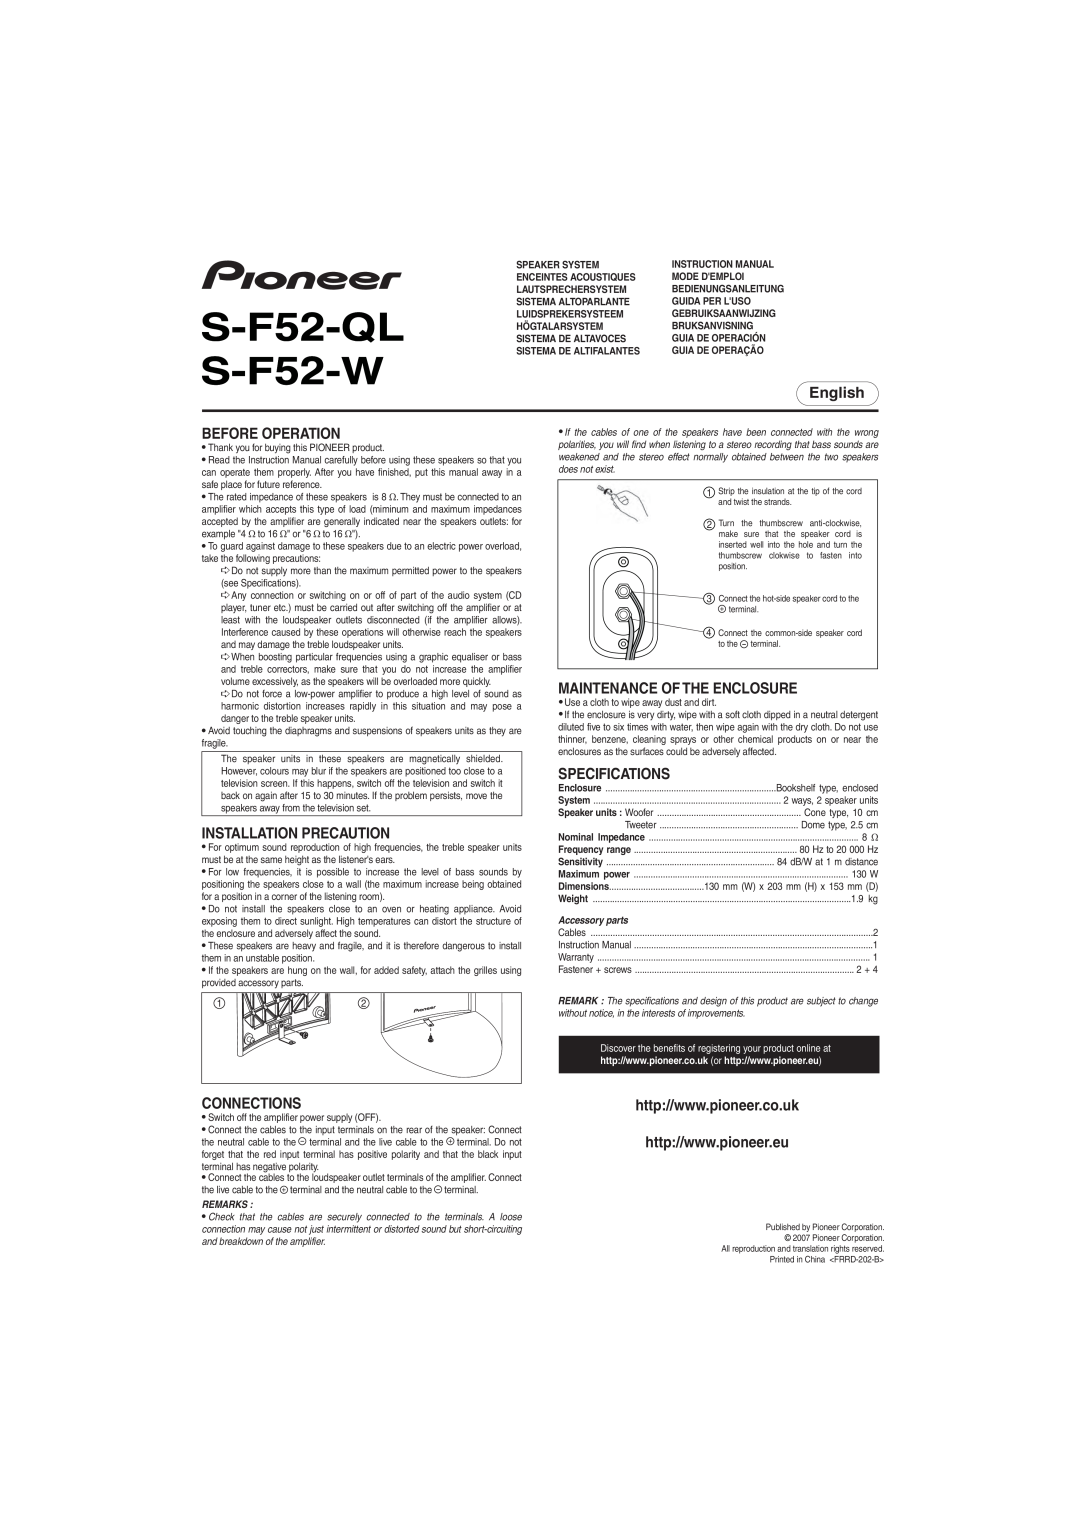 Pioneer S-F52-W, S-F52-QL specifications Connections, Accessory parts, Remarks, English, Before Operation, Specifications 